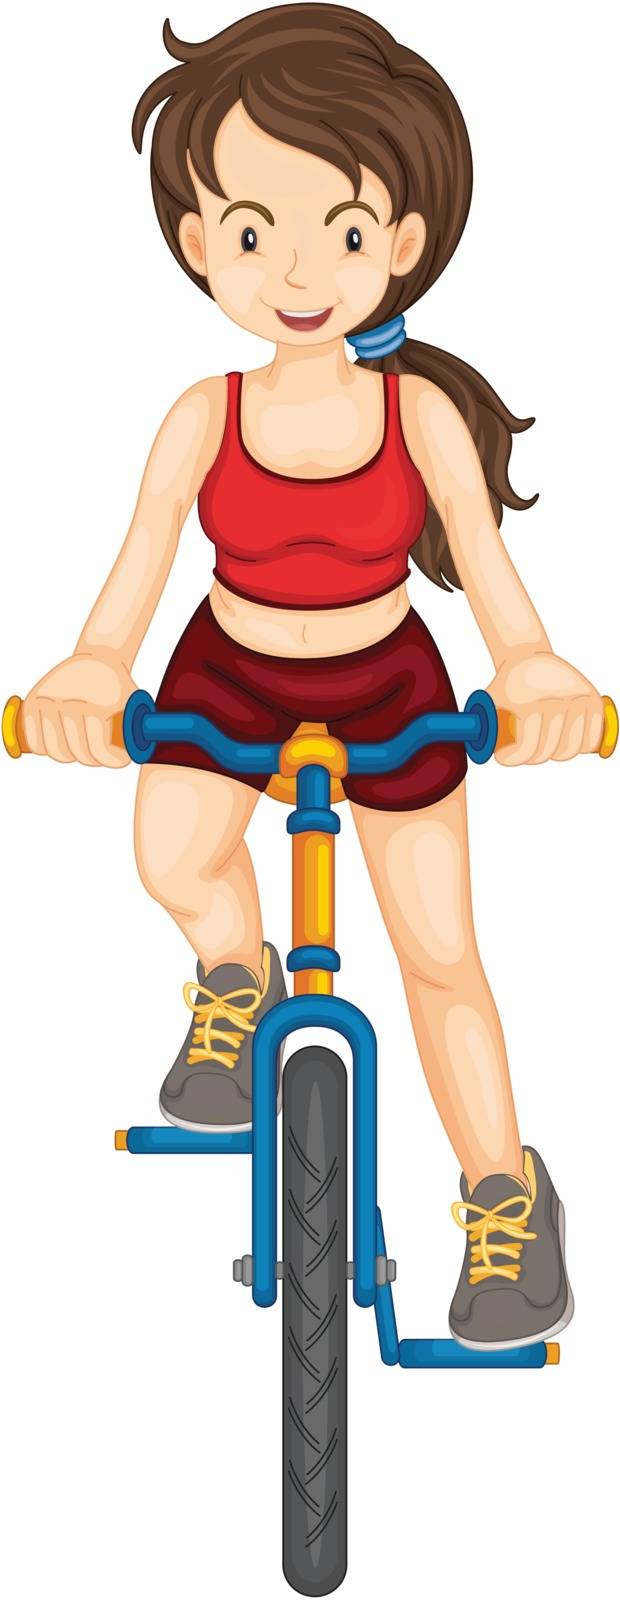 Illustration of a fit woman